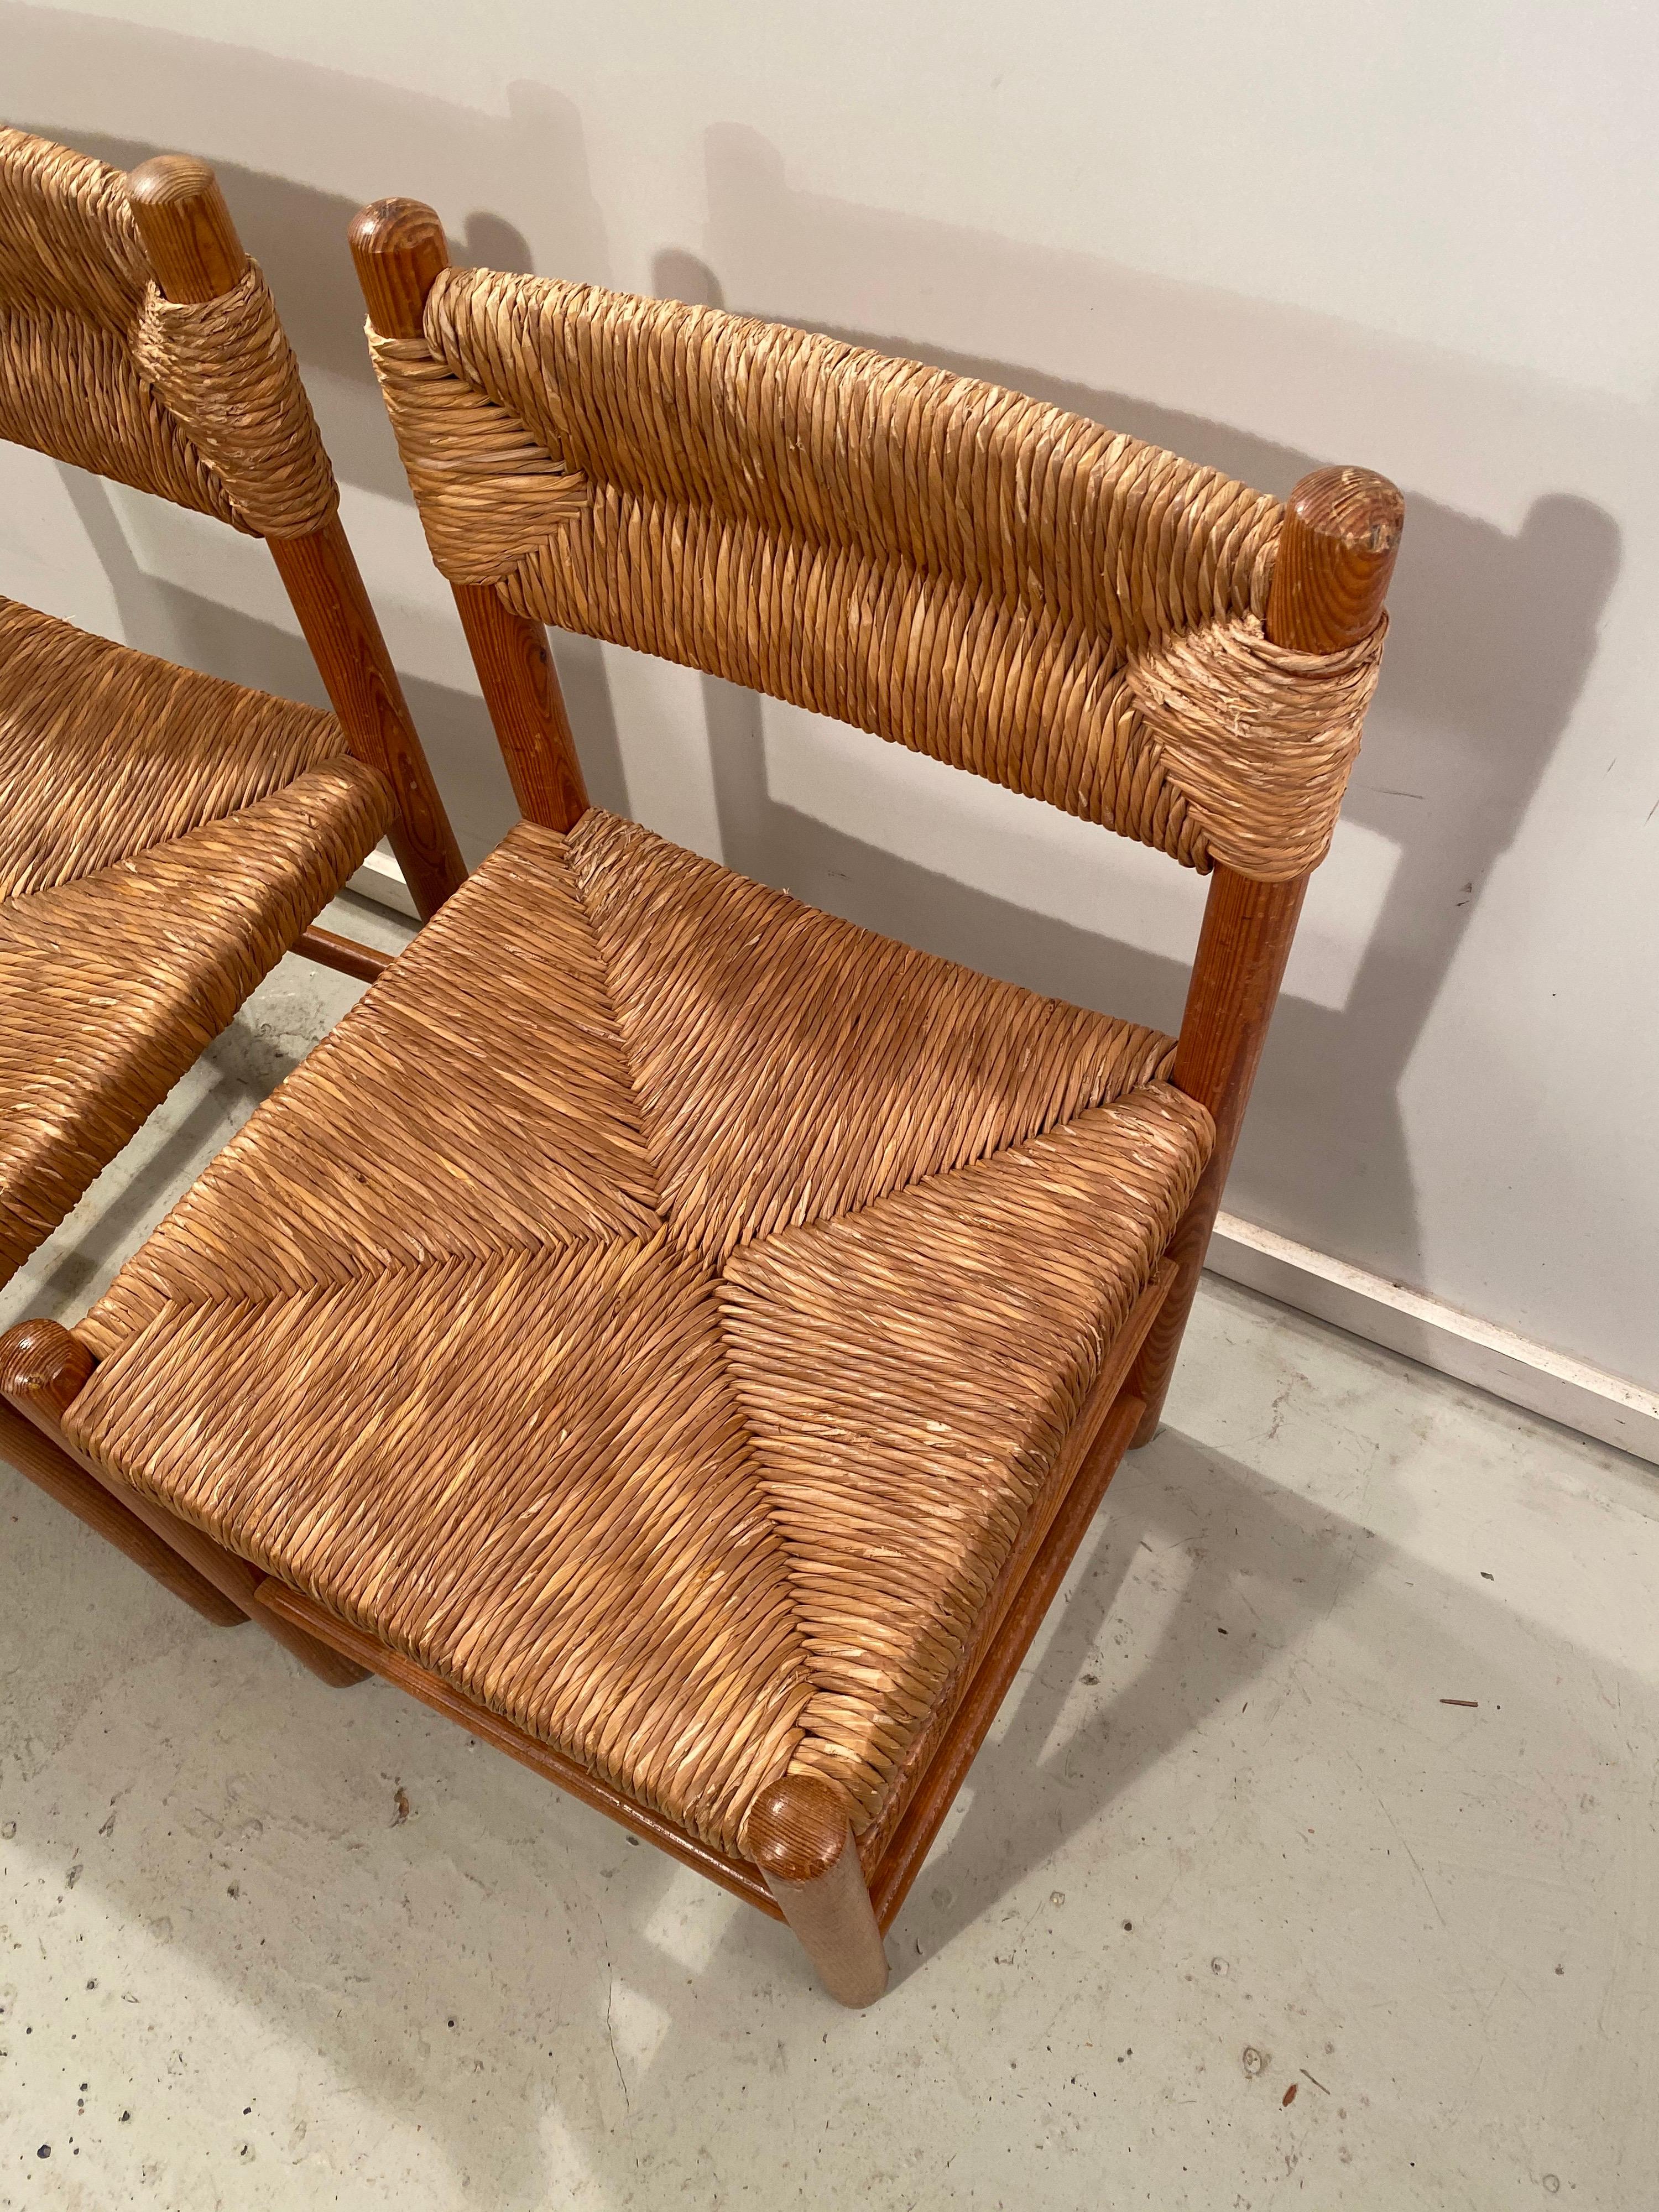 Pair of Wicker Dordogne Chairs by Charlotte Perriand for Sentou, 1950s For Sale 5